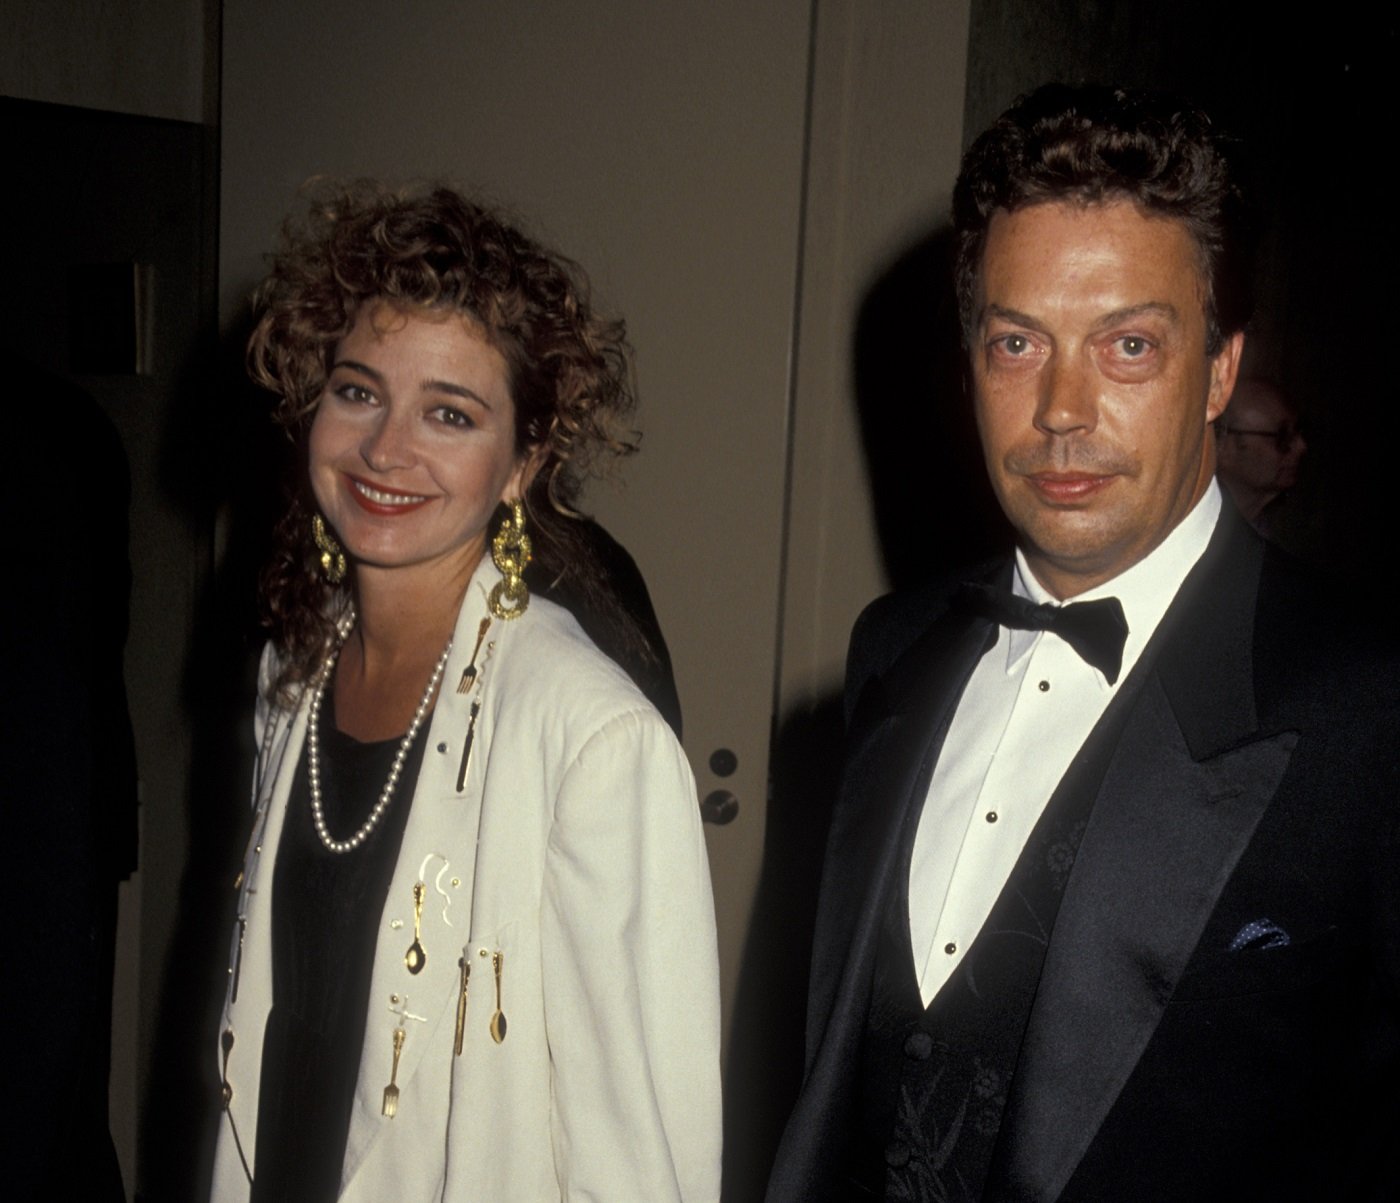 Annie Potts and Tim Curry attend an awards ceremony together in 1991